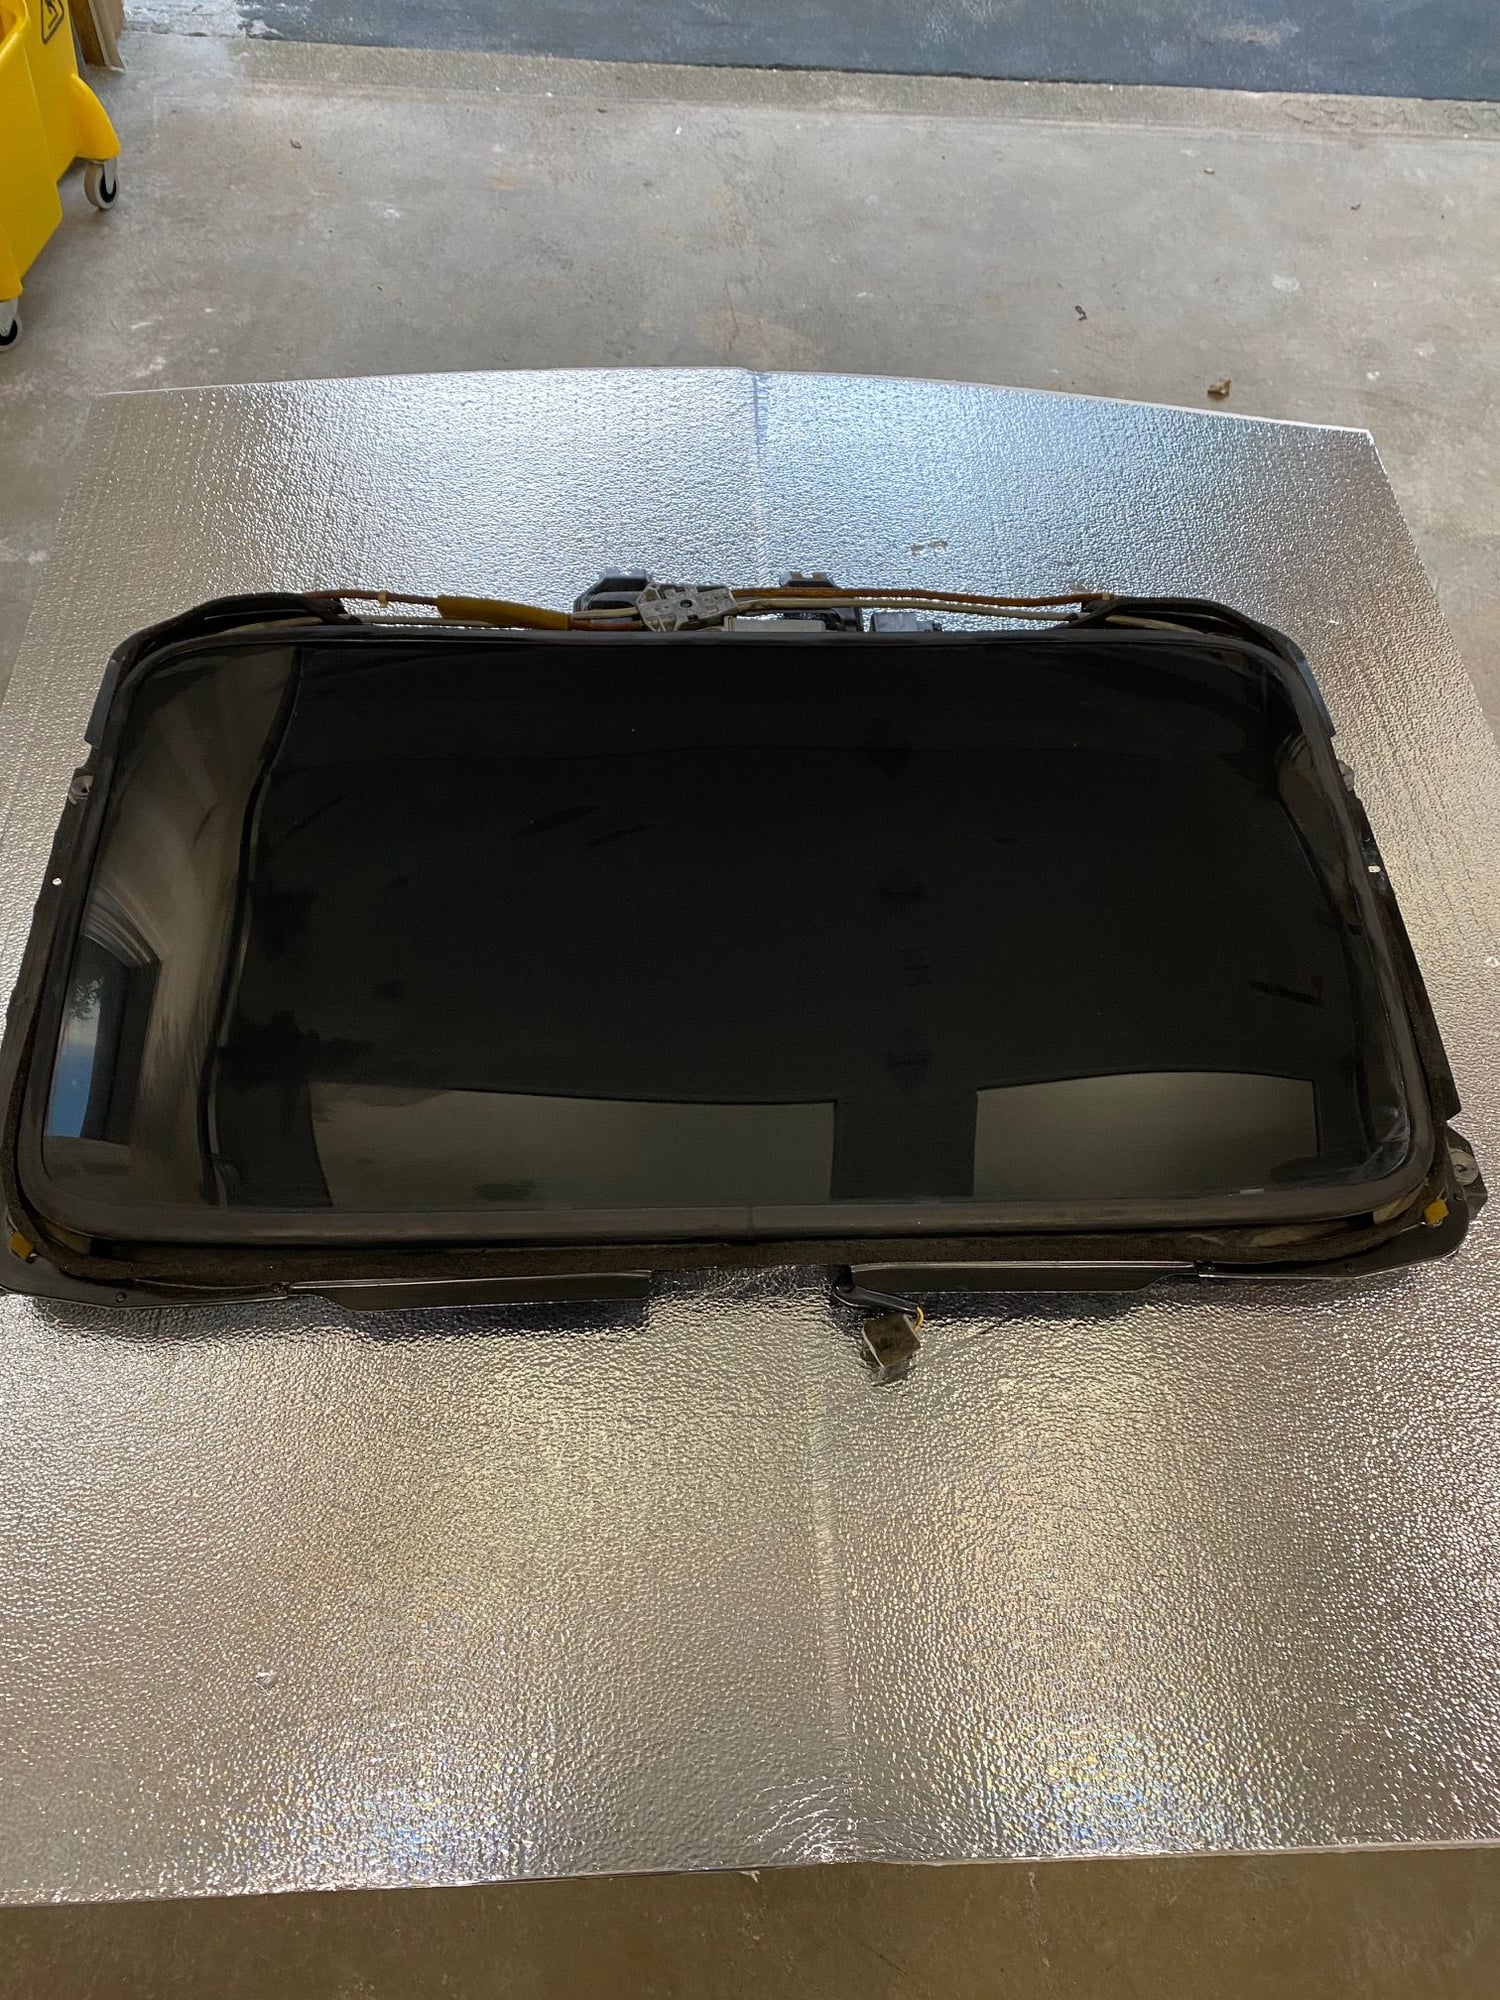 Exterior Body Parts - 1994 Glass Sunroof - Used - 1993 to 2000 Mazda RX-7 - Dix Hills, NY 11746, United States